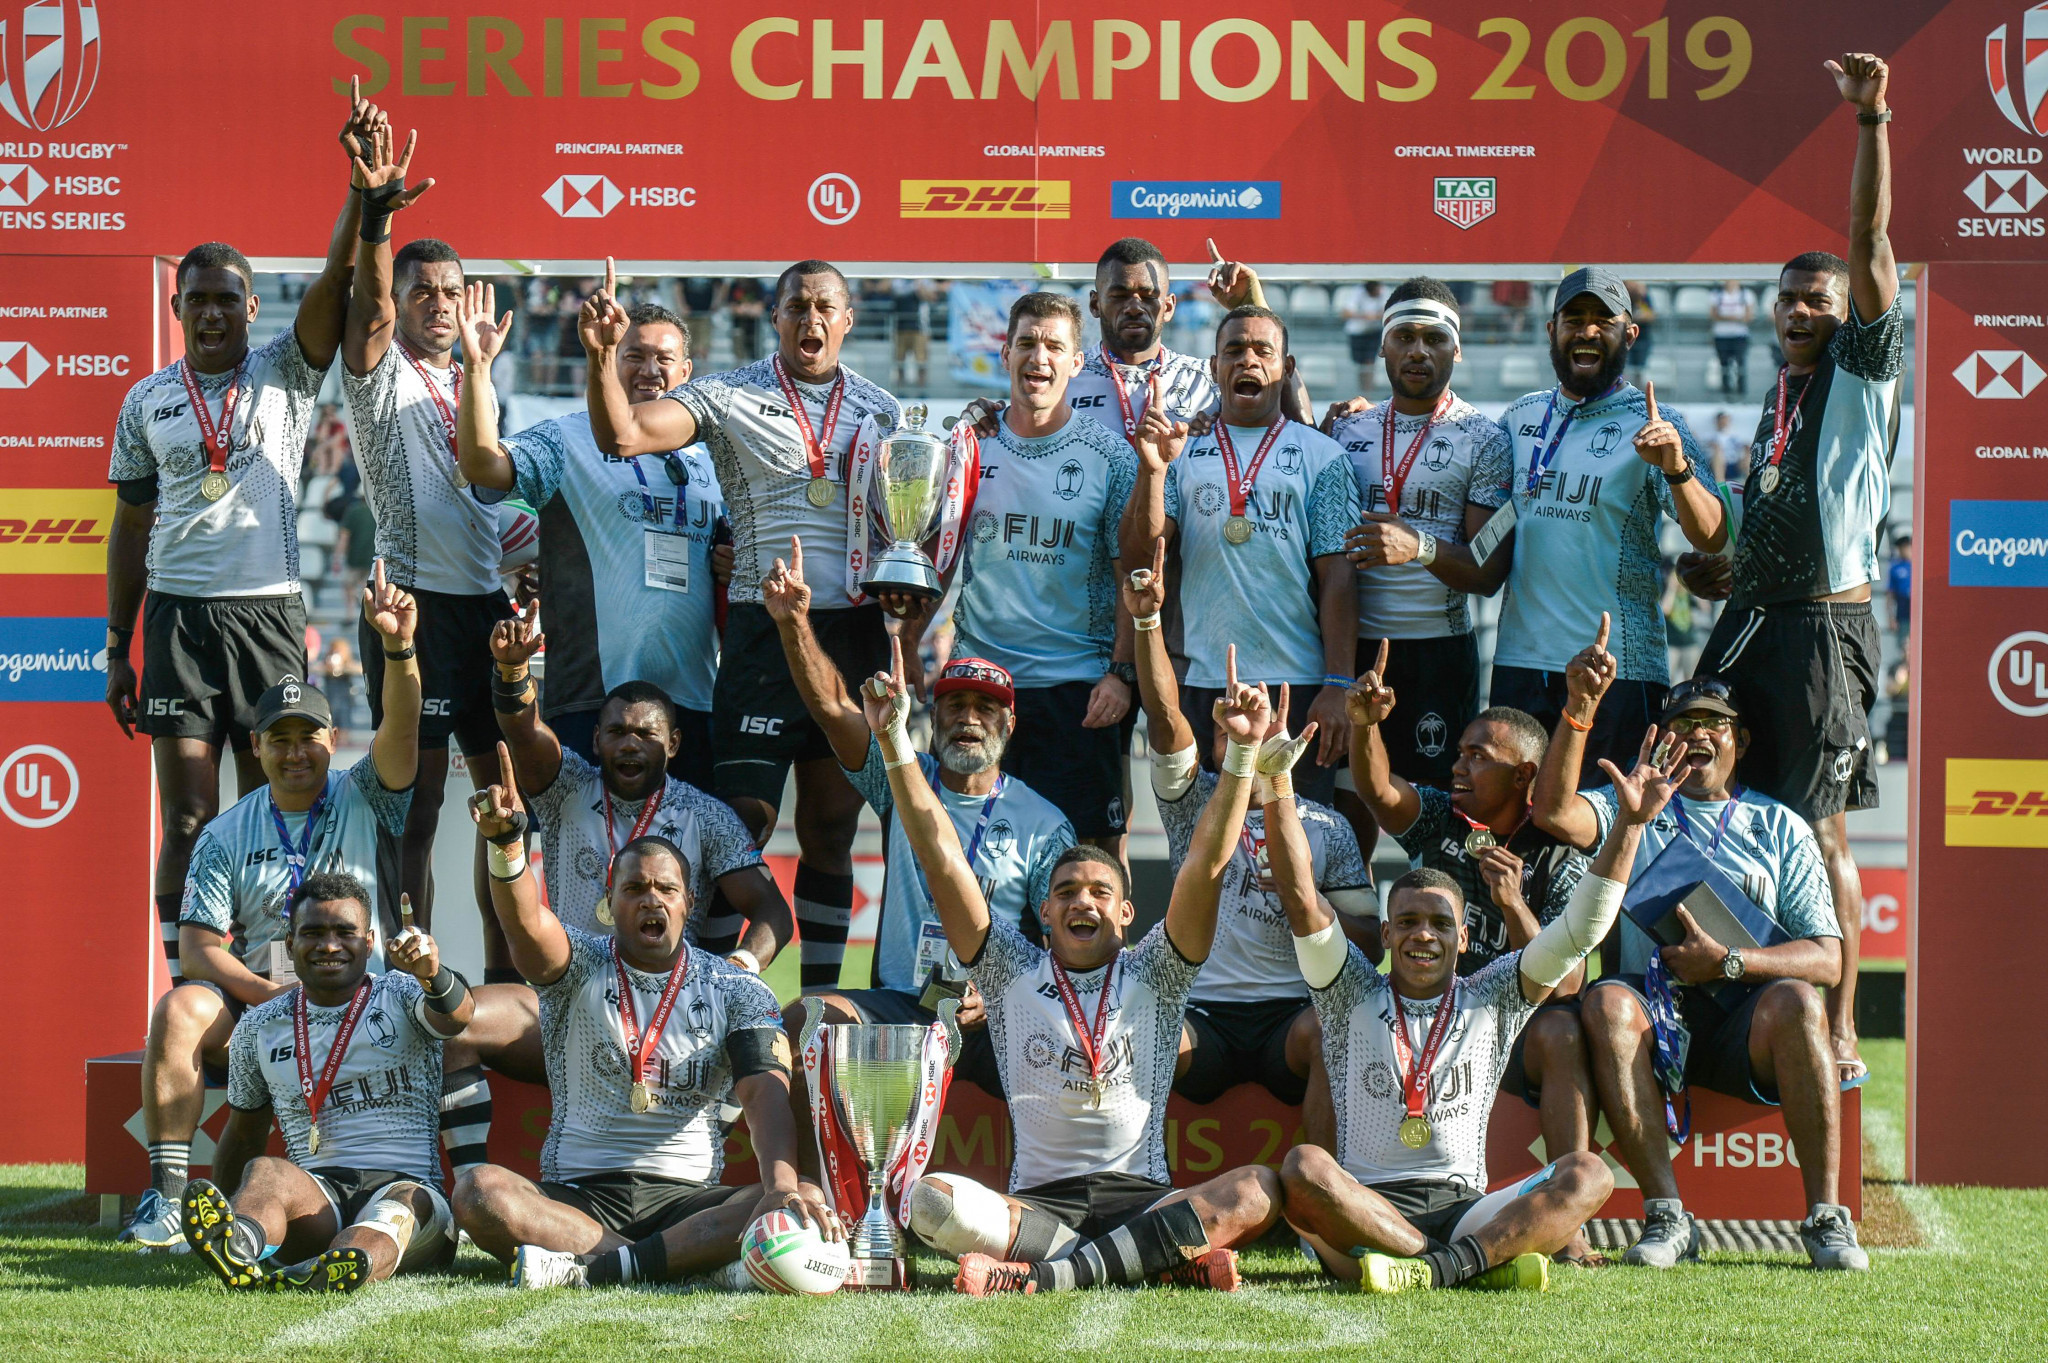 Fiji will be among the favourites for men's rugby sevens gold as they aim to defend their title ©Getty Images